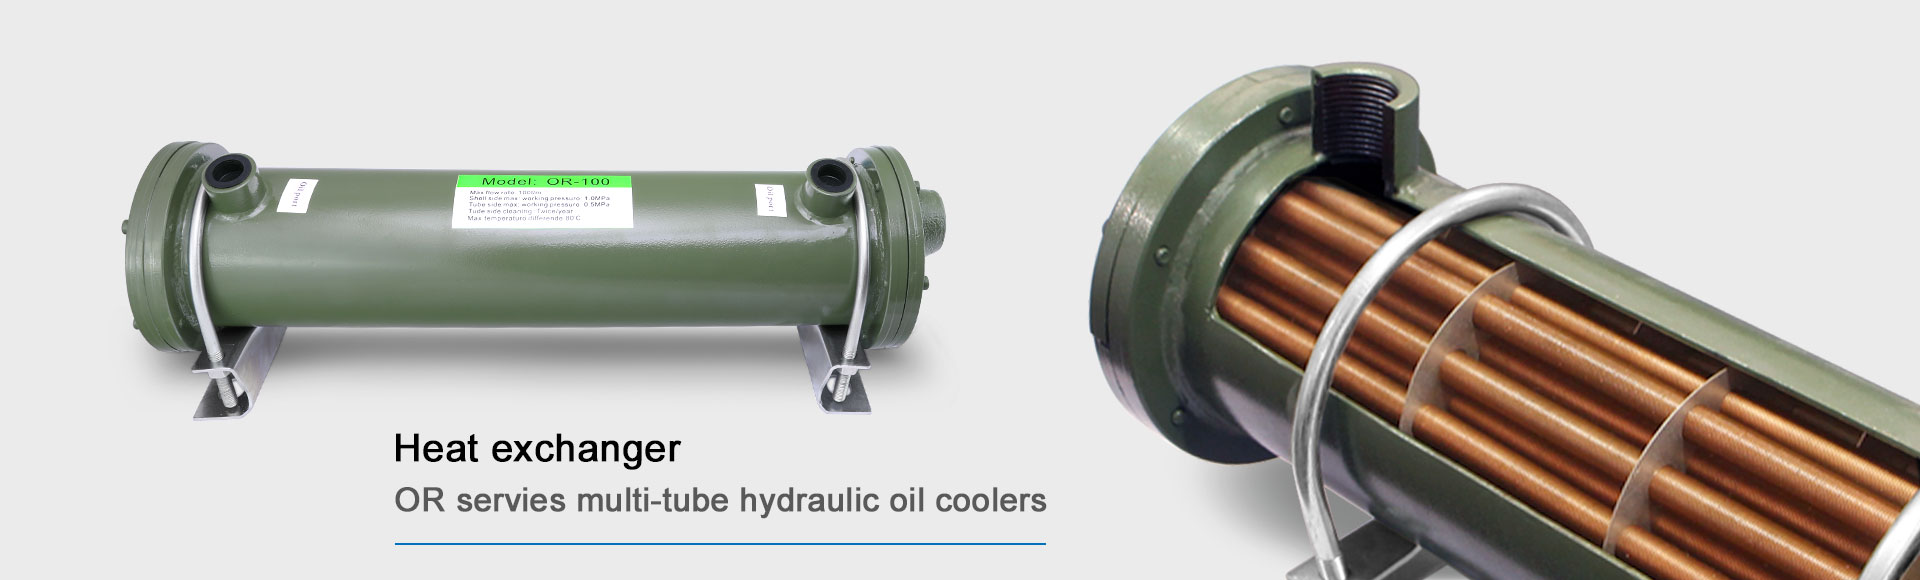 heat-exchanger-or-servies-multi-tube-hydraulic-oil-coolers